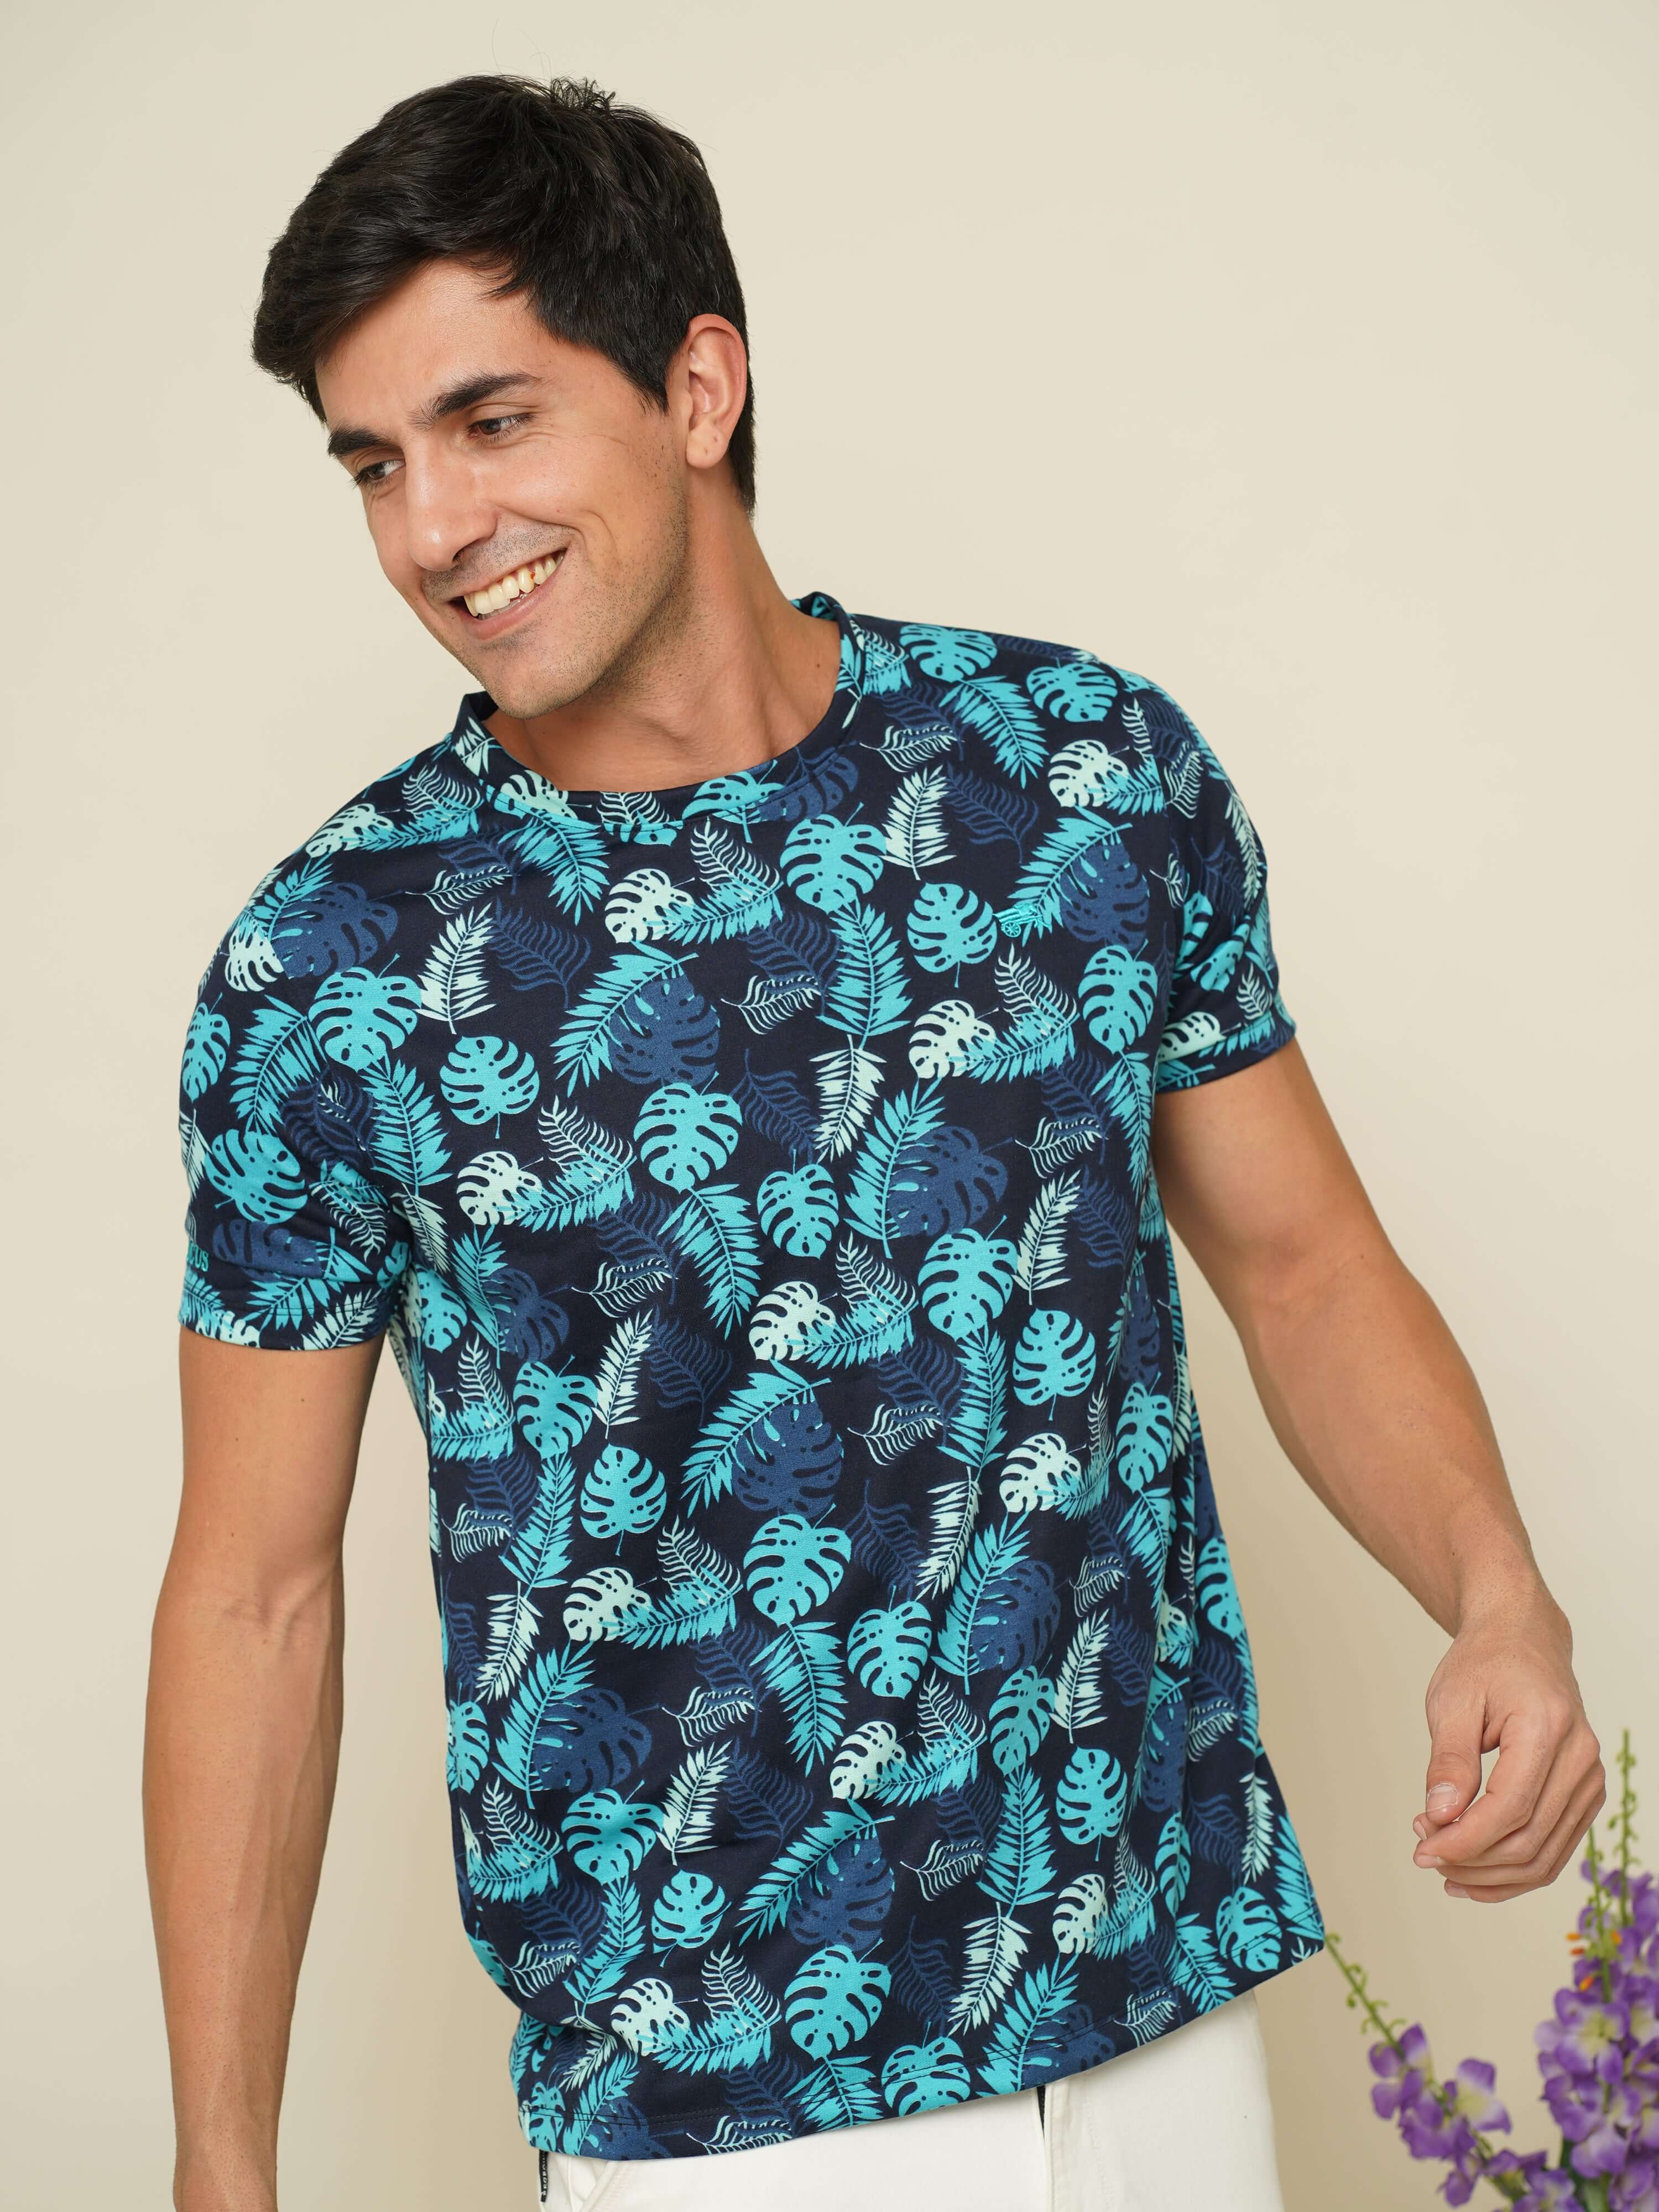 Navy/Teal Crew Neck Printed T Shirt shop online at Estilocus. 100% Cotton Designed and printed on knitted fabric. The fabric is stretchy and lightweight, with a soft skin feel and no wrinkles. Flat collar is smooth on the neck and keeps you comfortable al